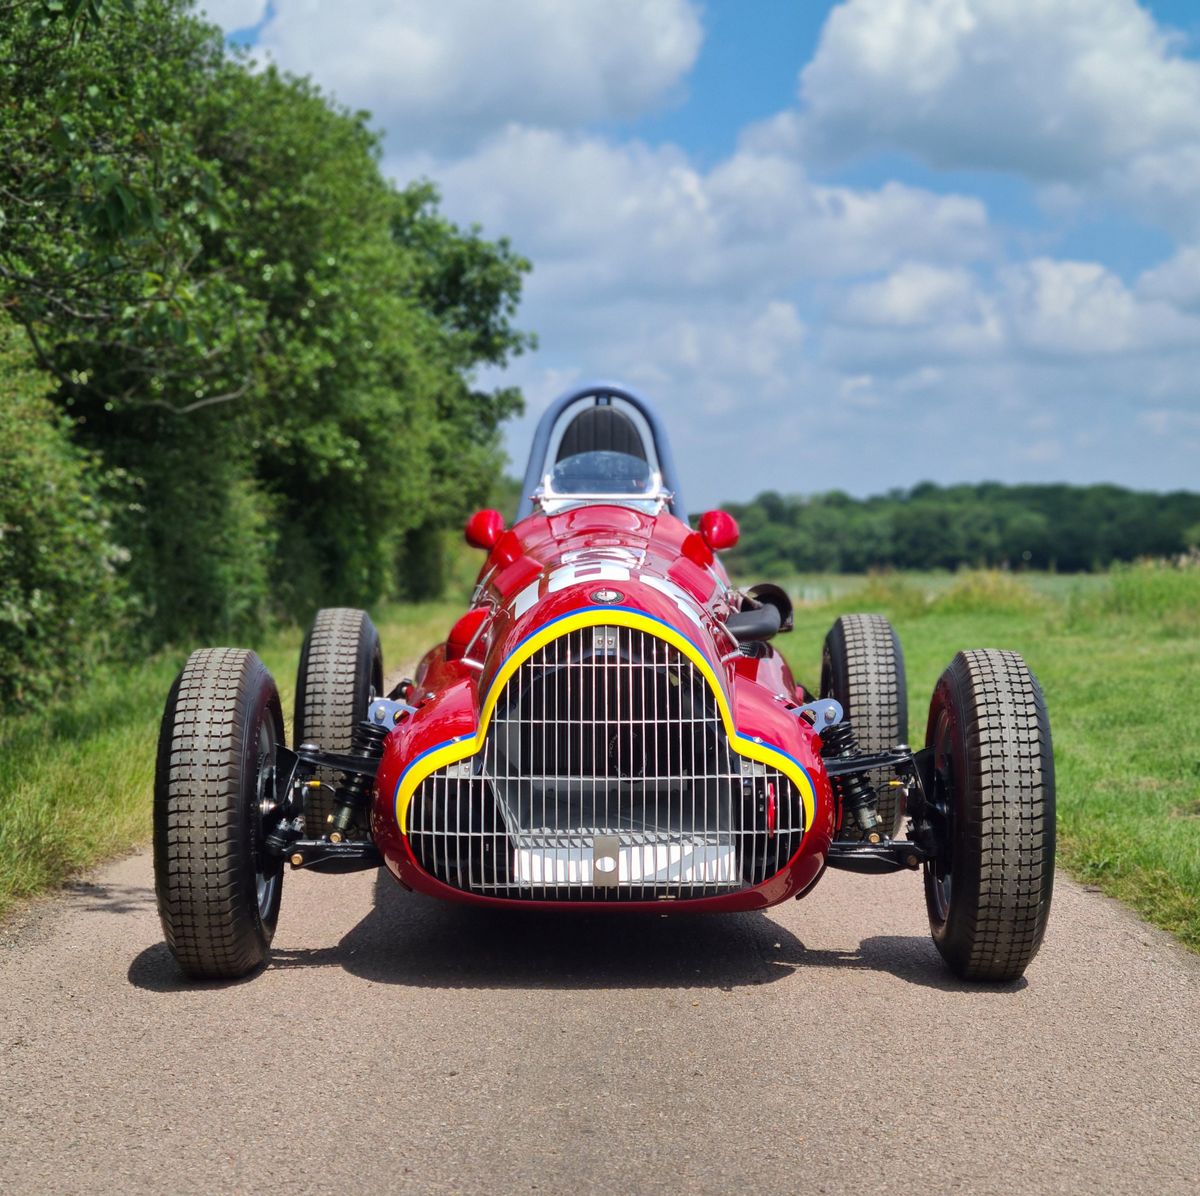 This British Kit Car Could Get Plenty of New People into Racing